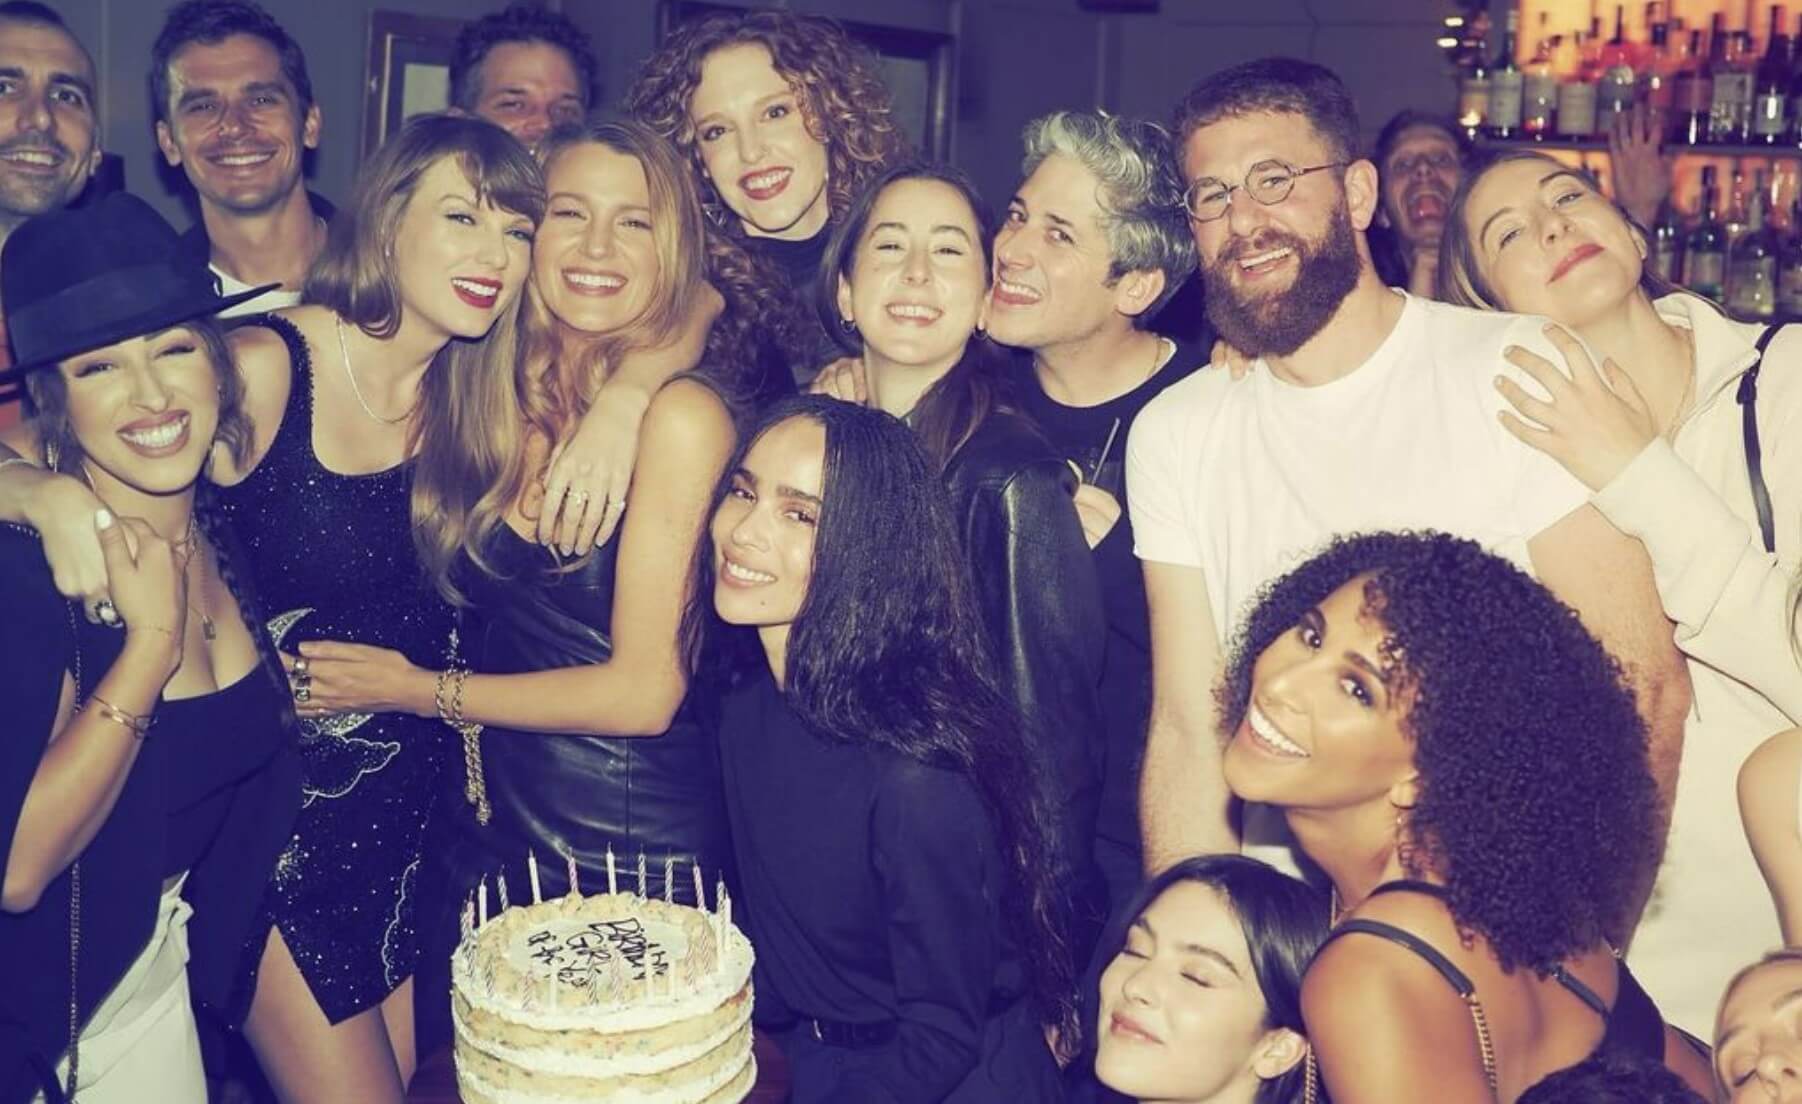 Taylow Swift with her Milk Bar cake at her 34th birthday party. Image via Instagram